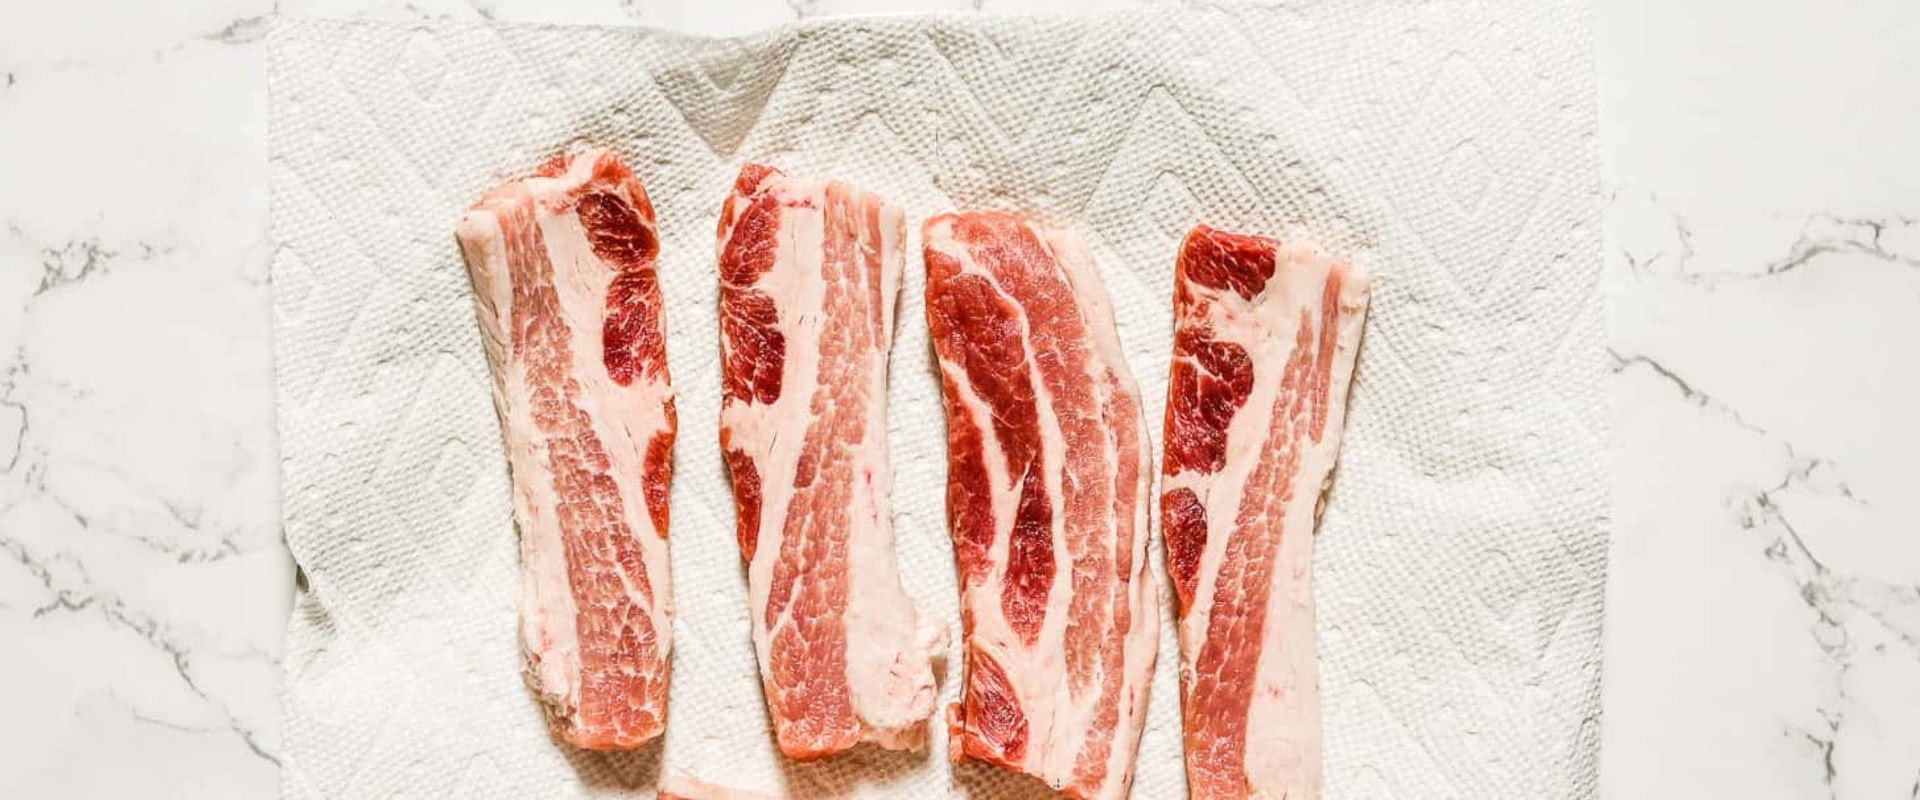 A Comprehensive Overview of Pork Belly